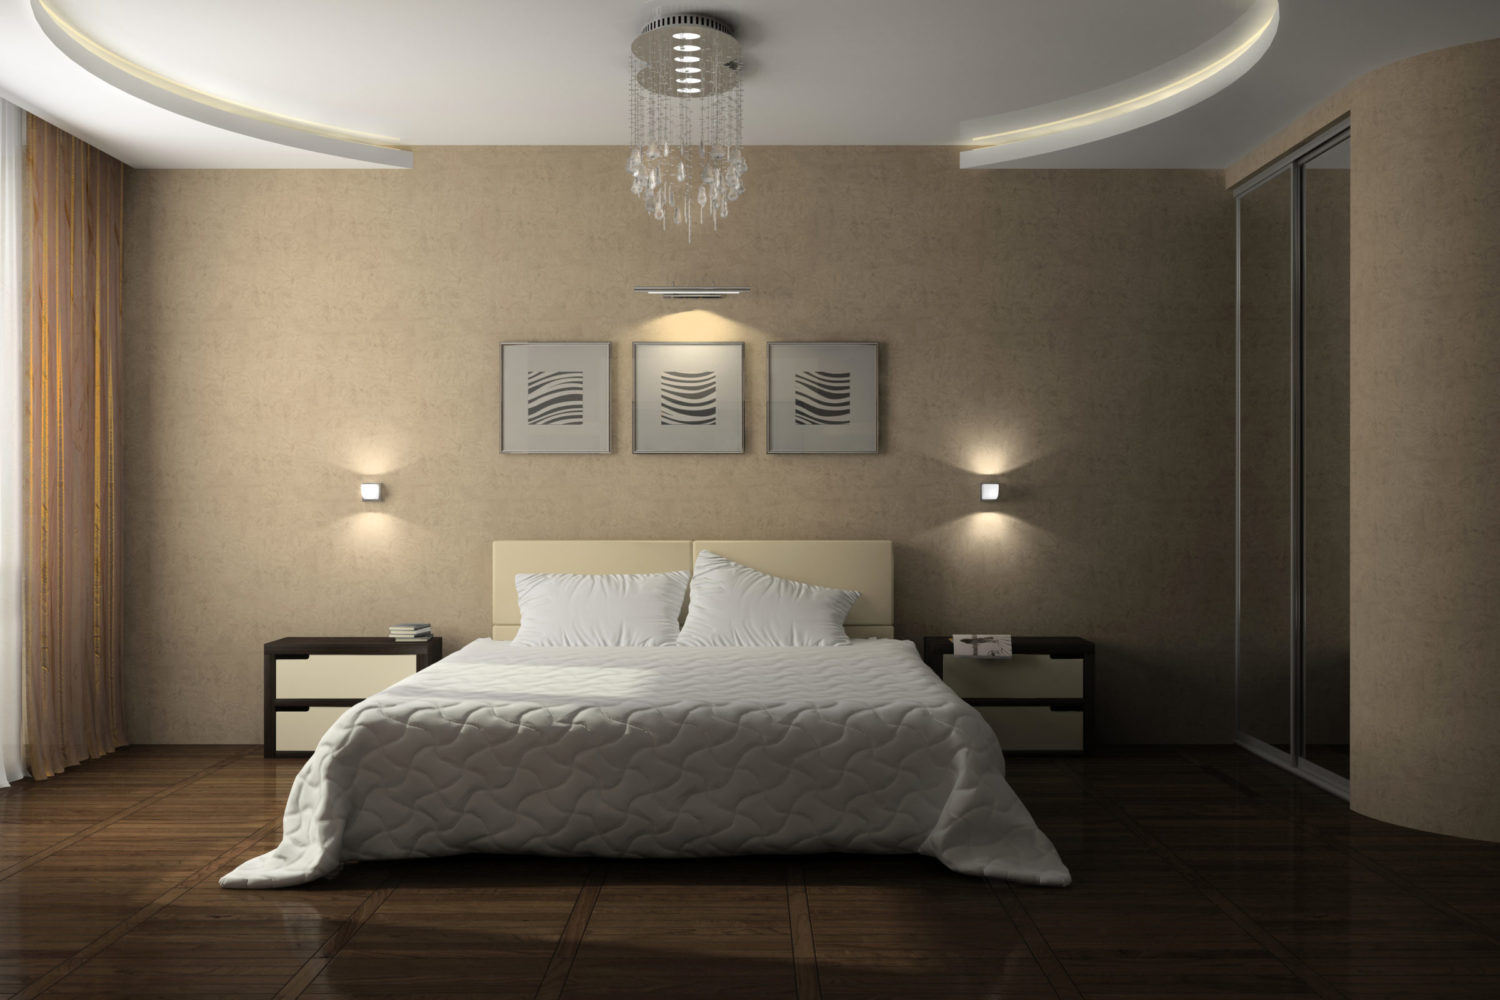 Interior of the stylish bedroom 3D rendering